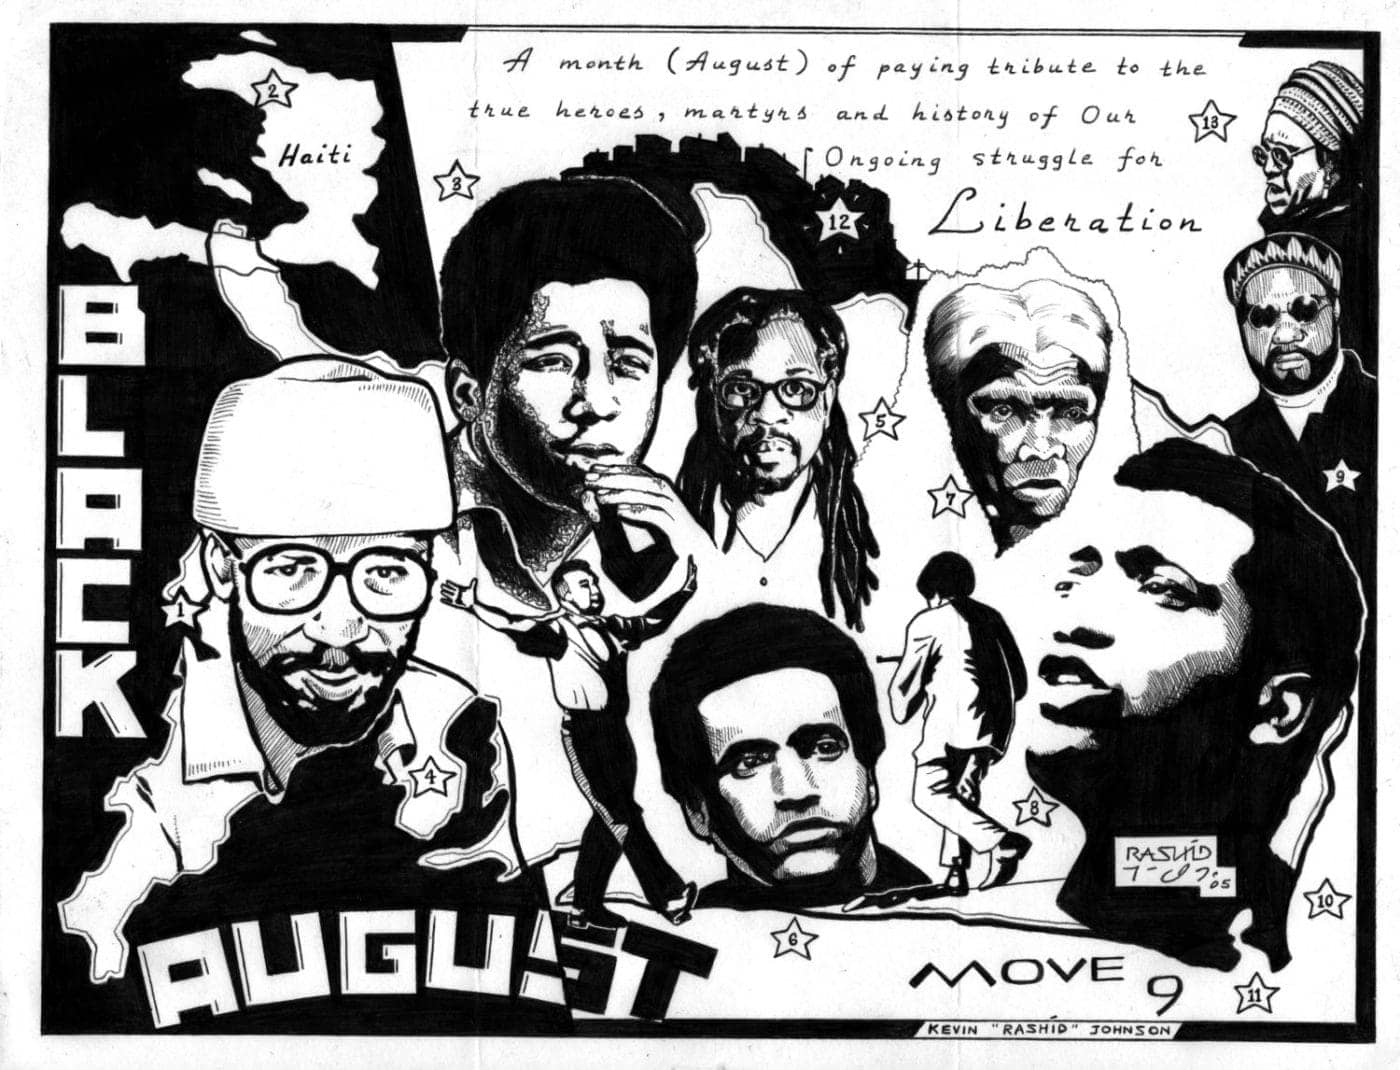 Black-August-art-by-Kevin-Rashid-Johnson-2005-1400x1070, The birth, meaning and practice of Black August, Behind Enemy Lines 